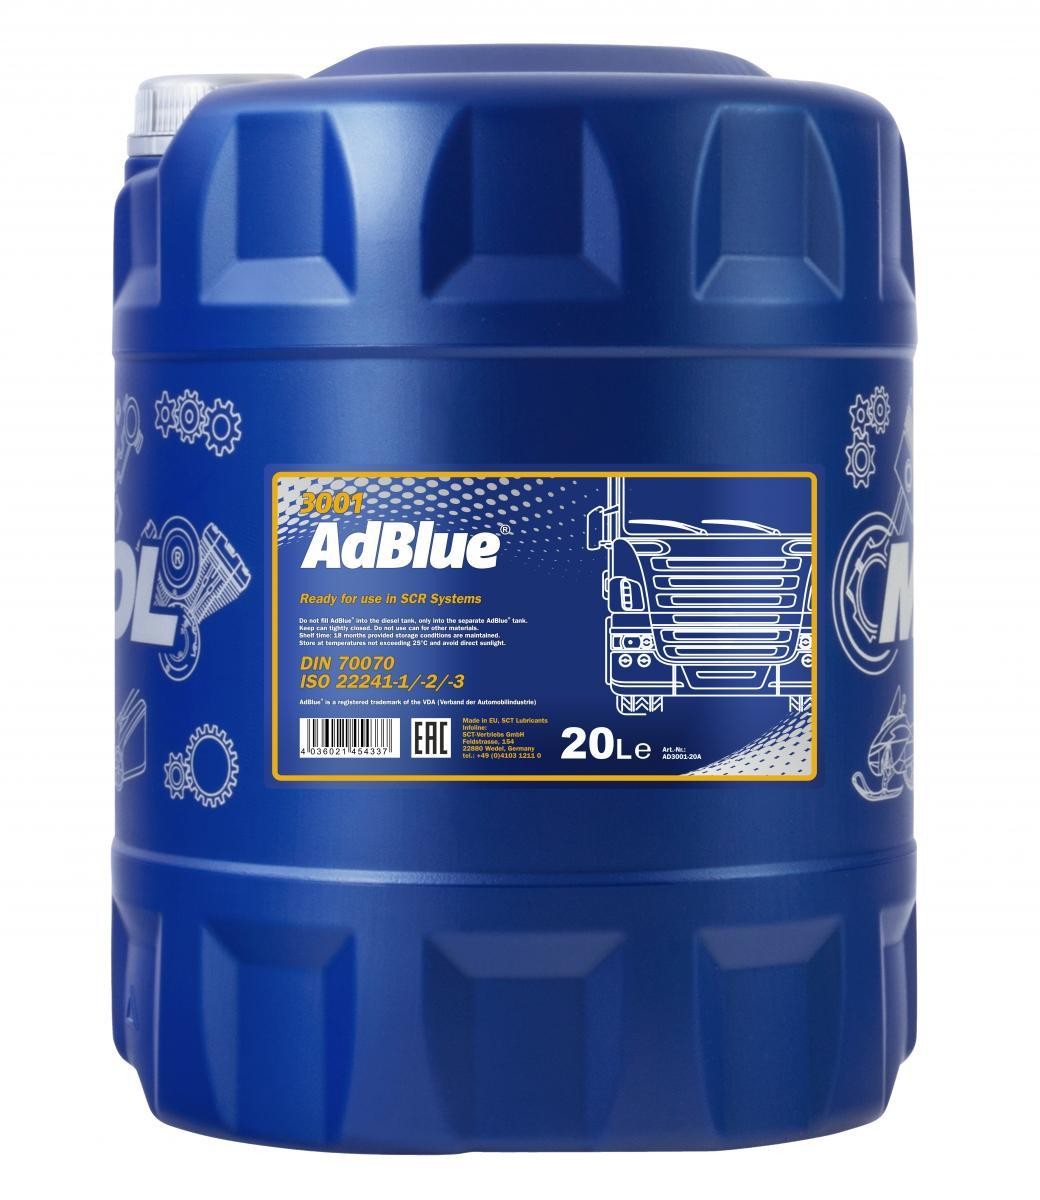 Diesel exhaust fluids / adblue for your car